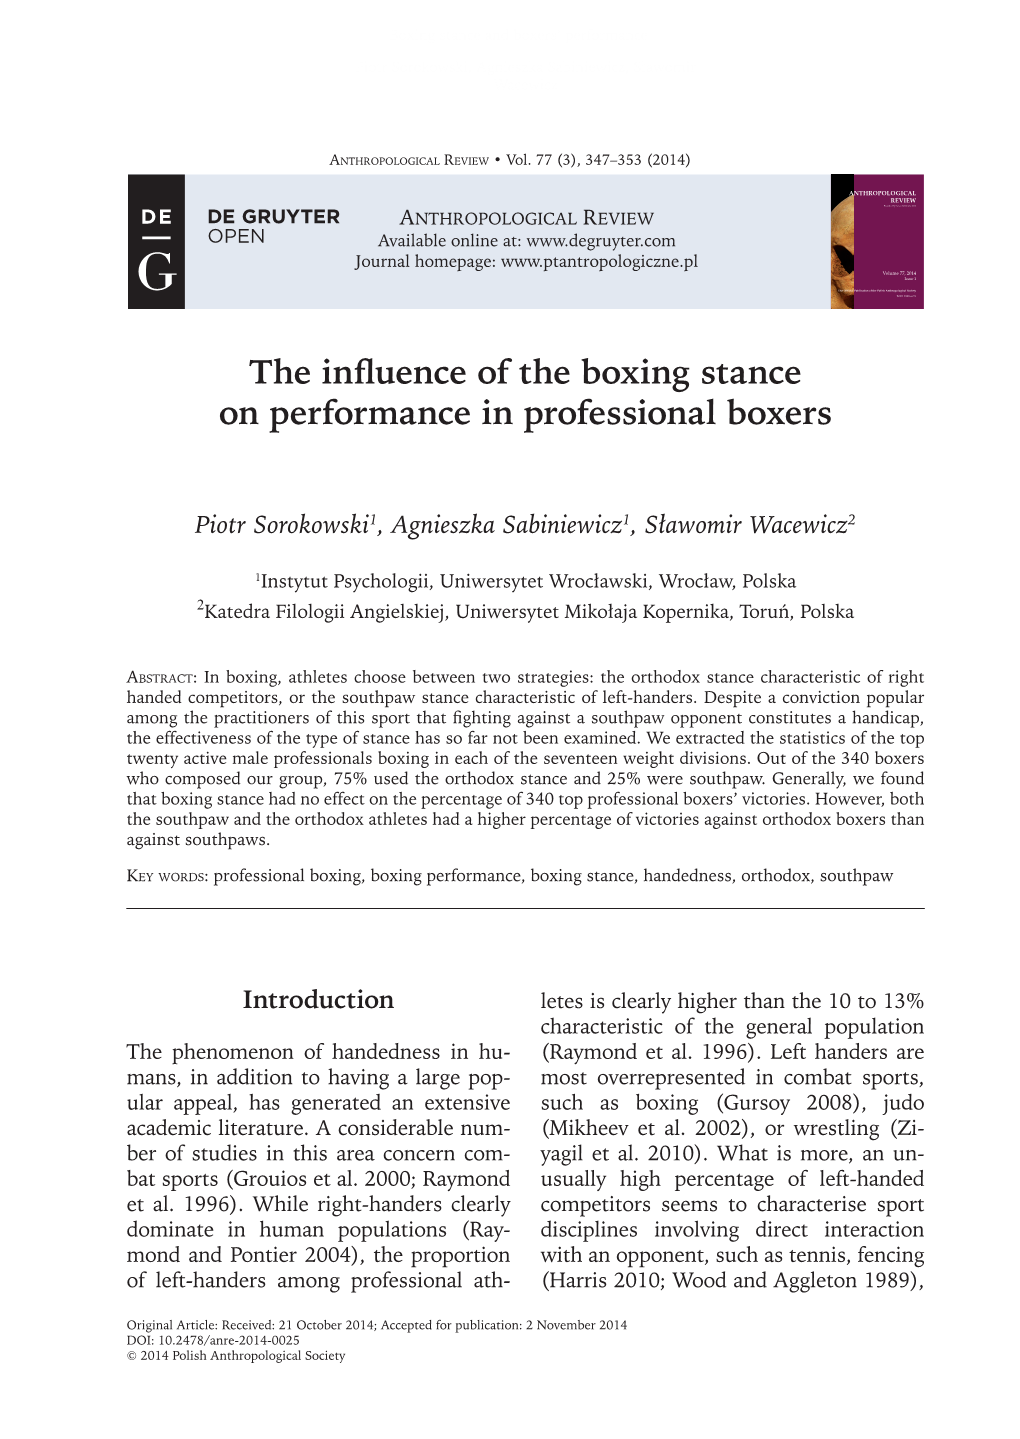 The Influence of the Boxing Stance on Performance in Professional Boxers